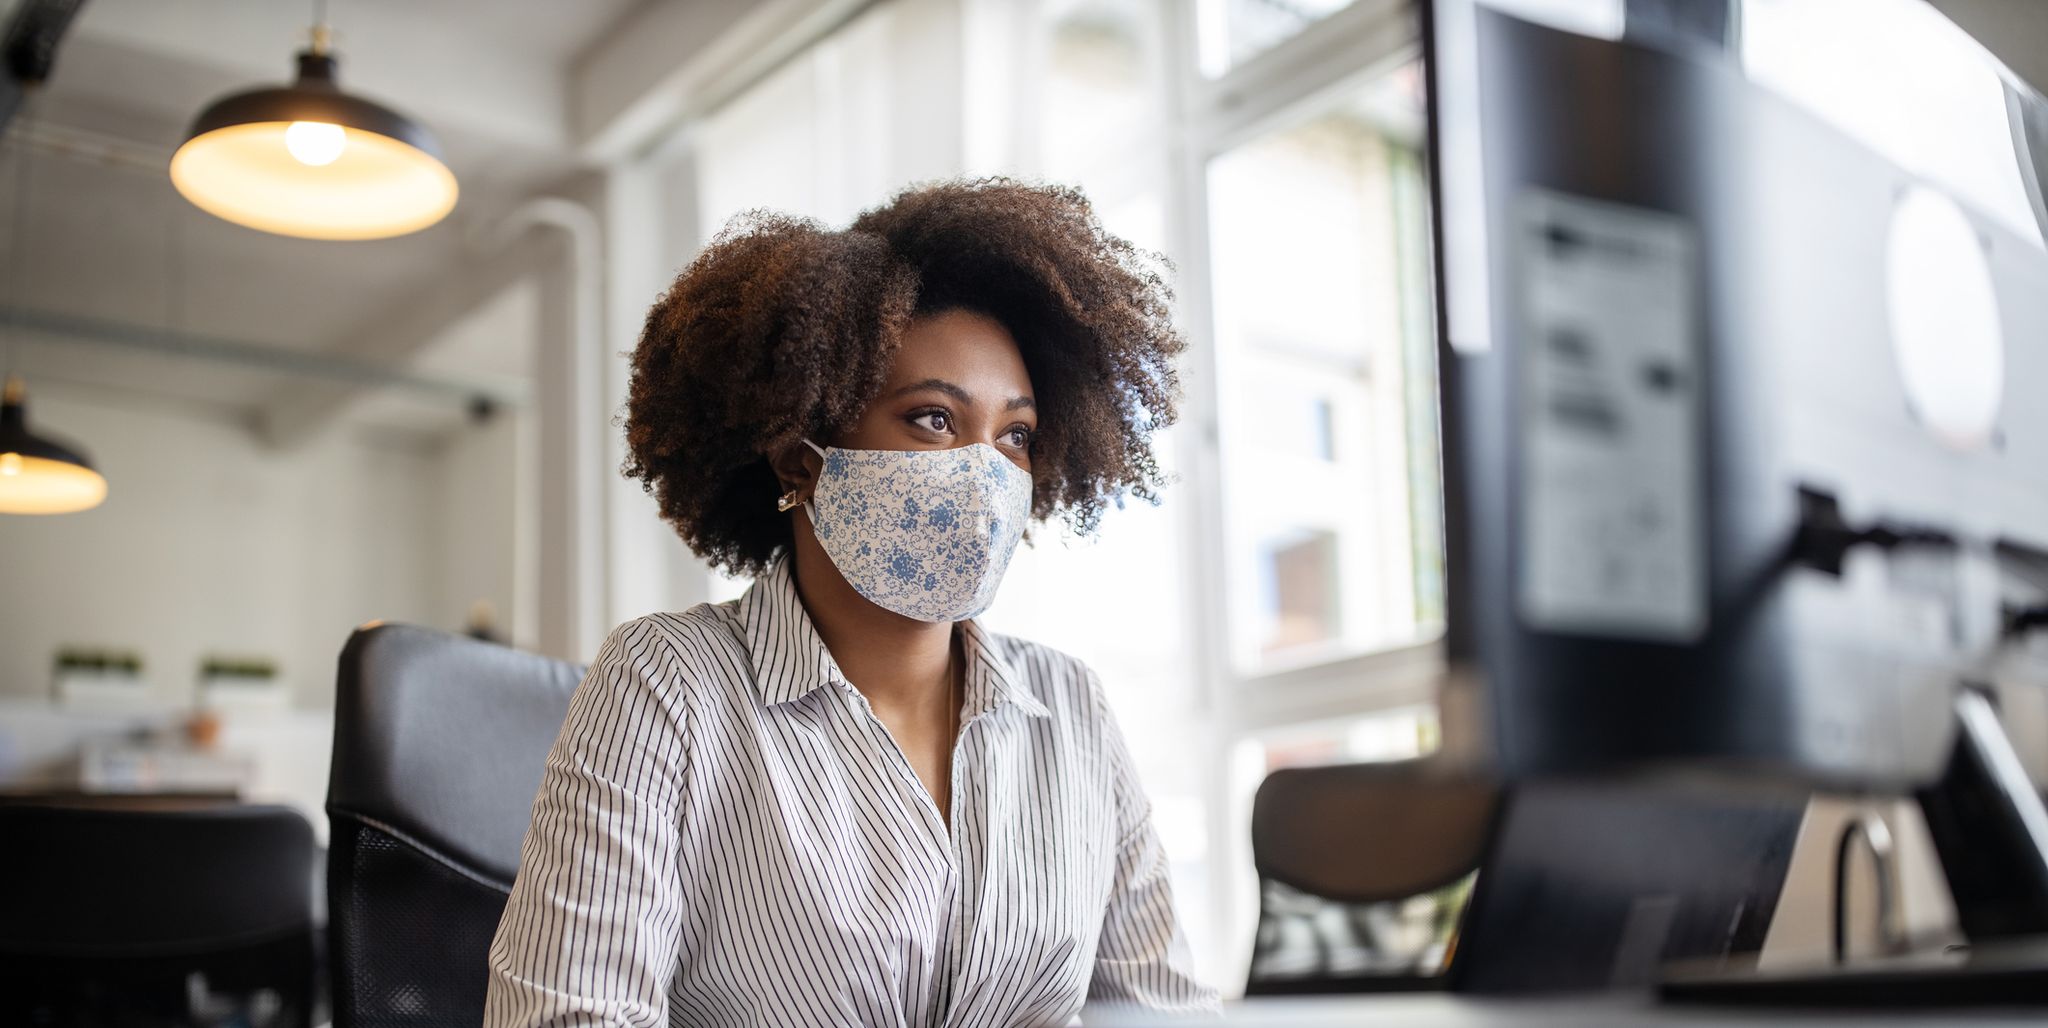 businesswoman with face mask working at her desk looking at computer monitor, in office female professional back to work after covid 19 pandemic lockdown